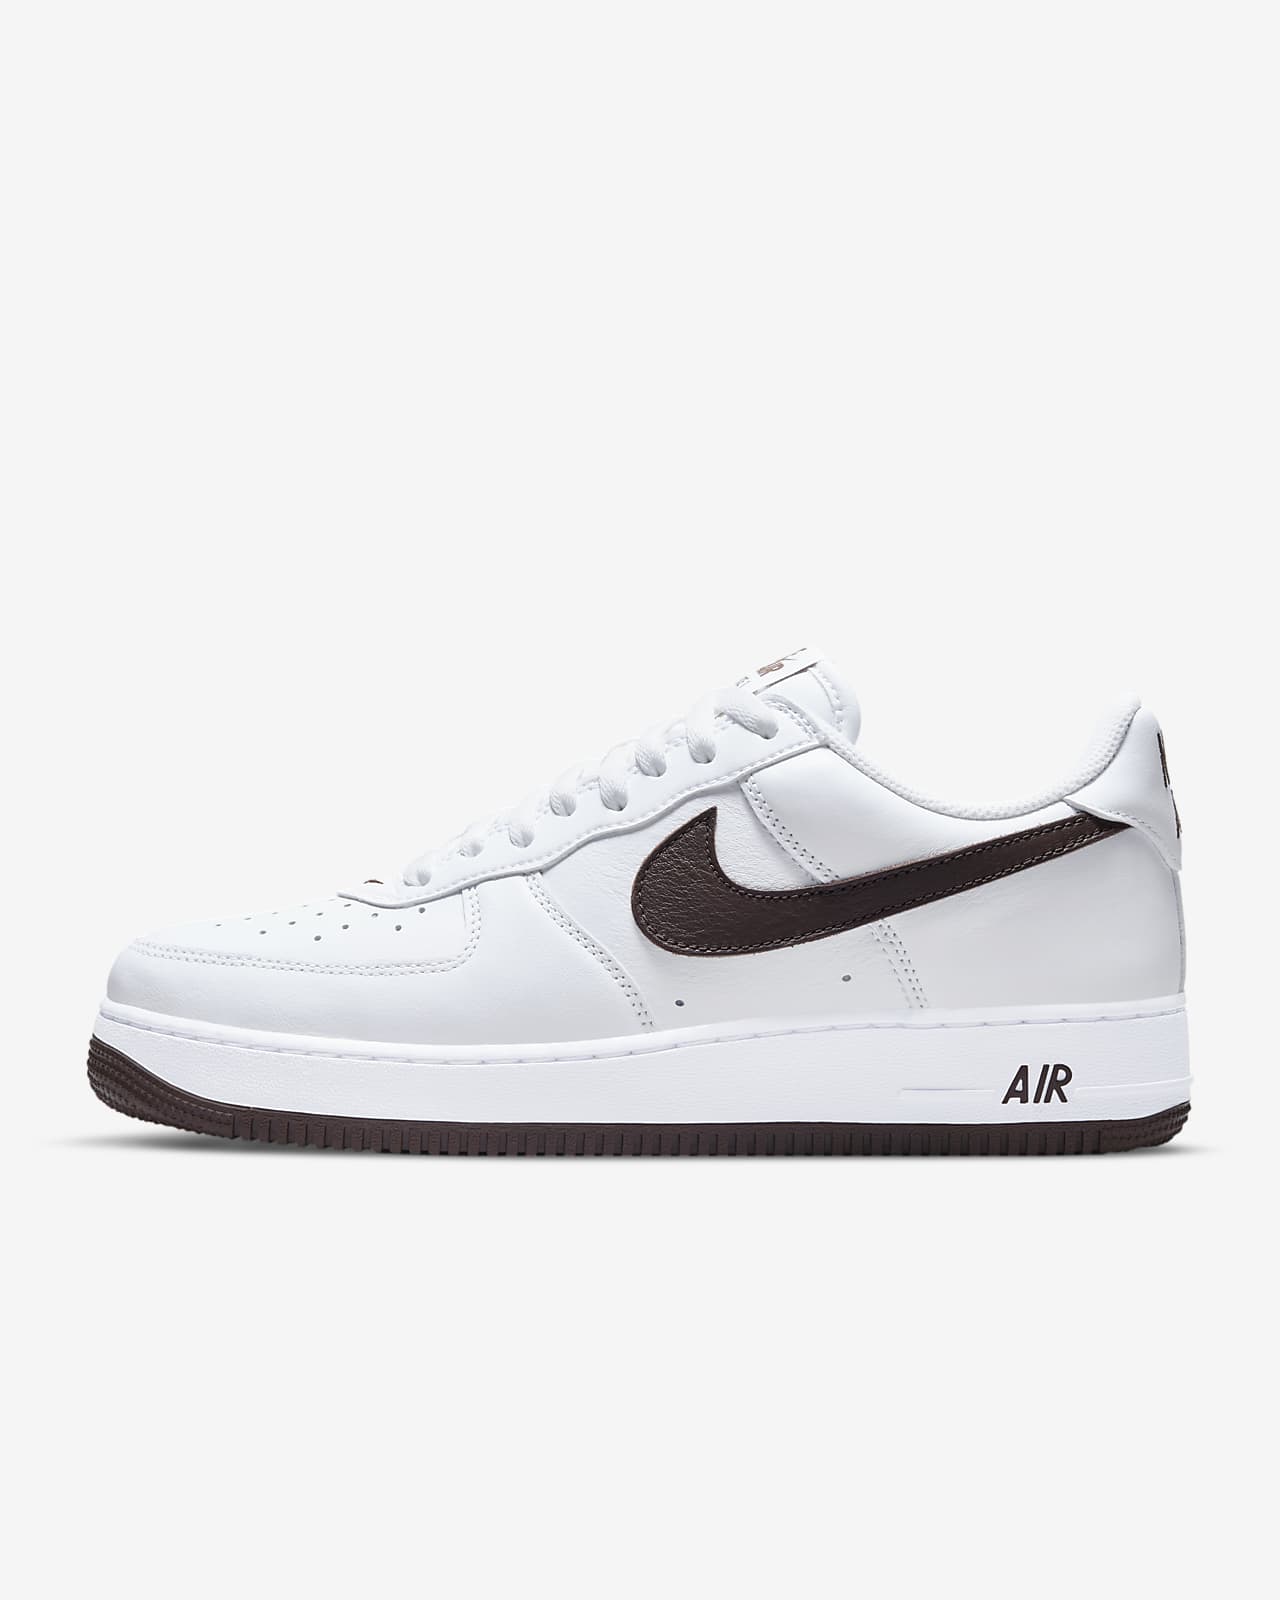 Cleanly Write out mother Nike Air Force 1 Low Retro Men's Shoes. Nike.com